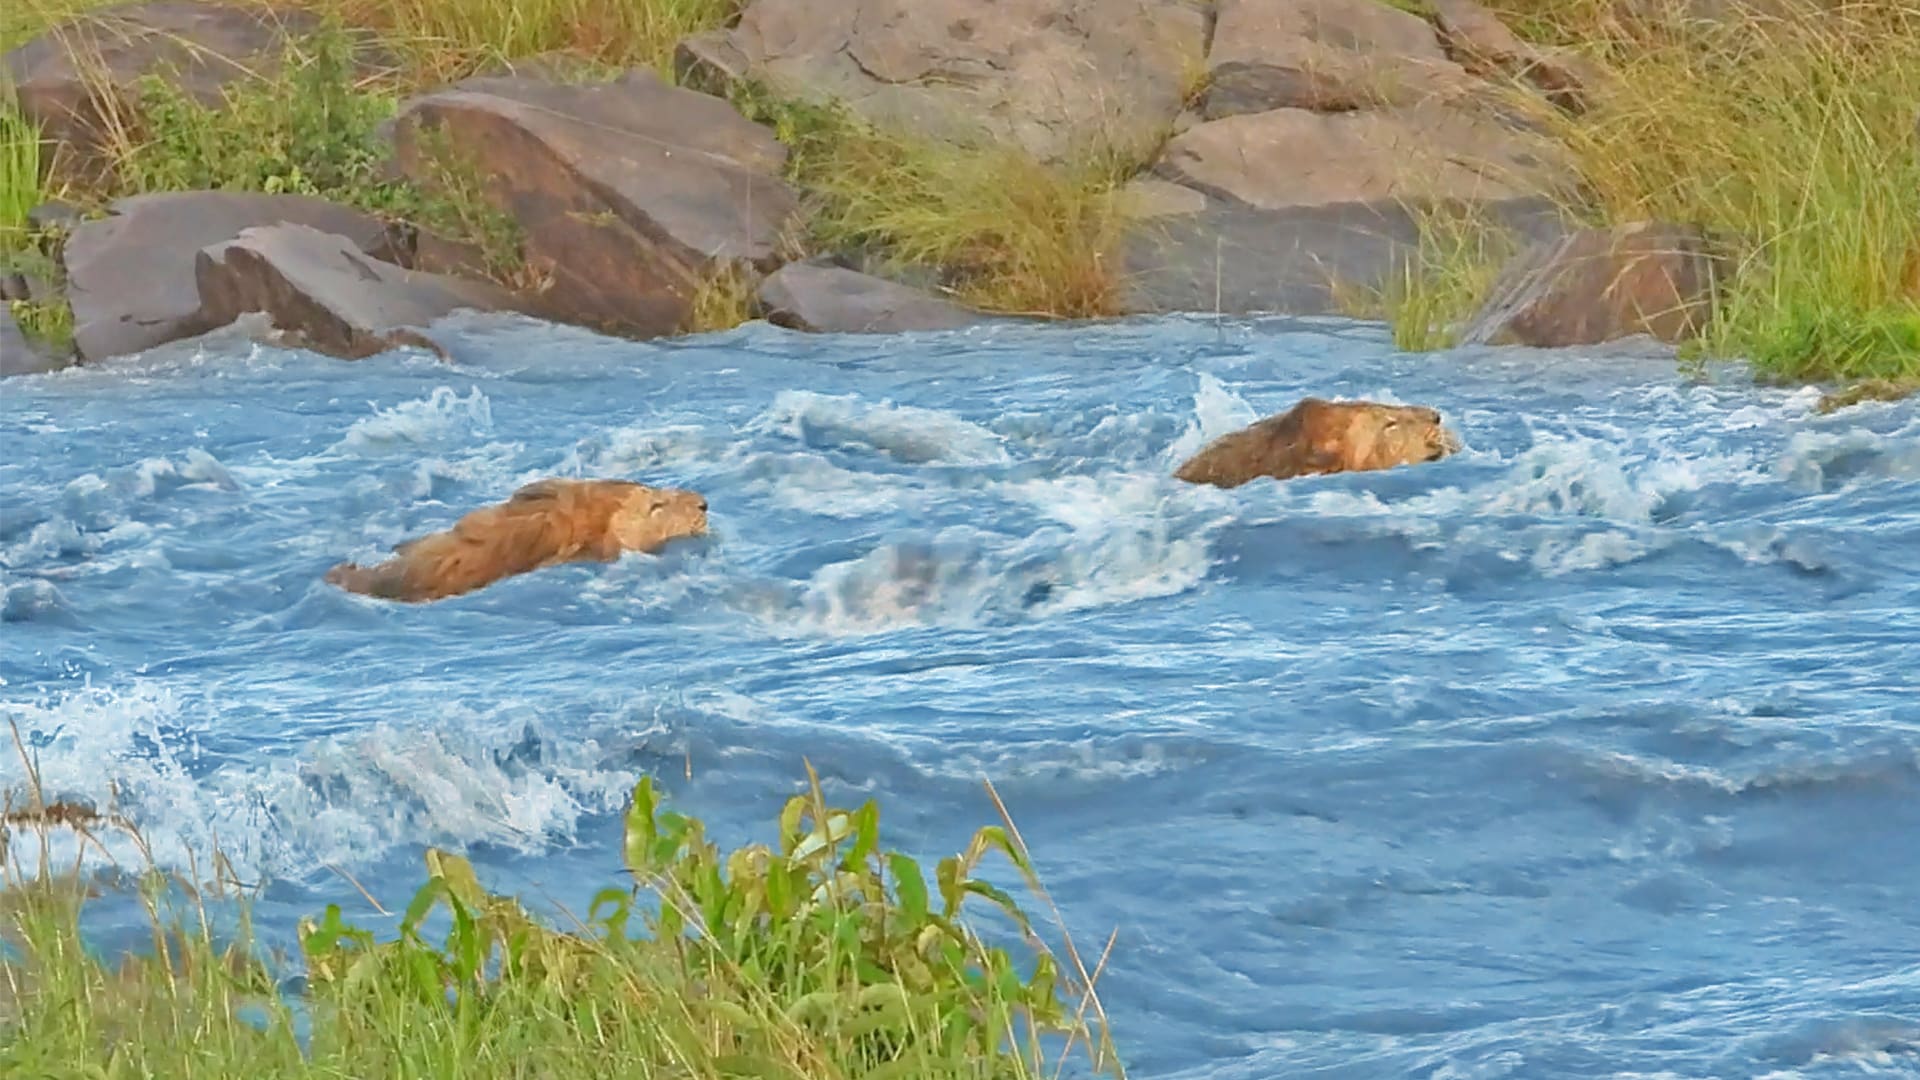 Male Lions Washed Away By A Raging River